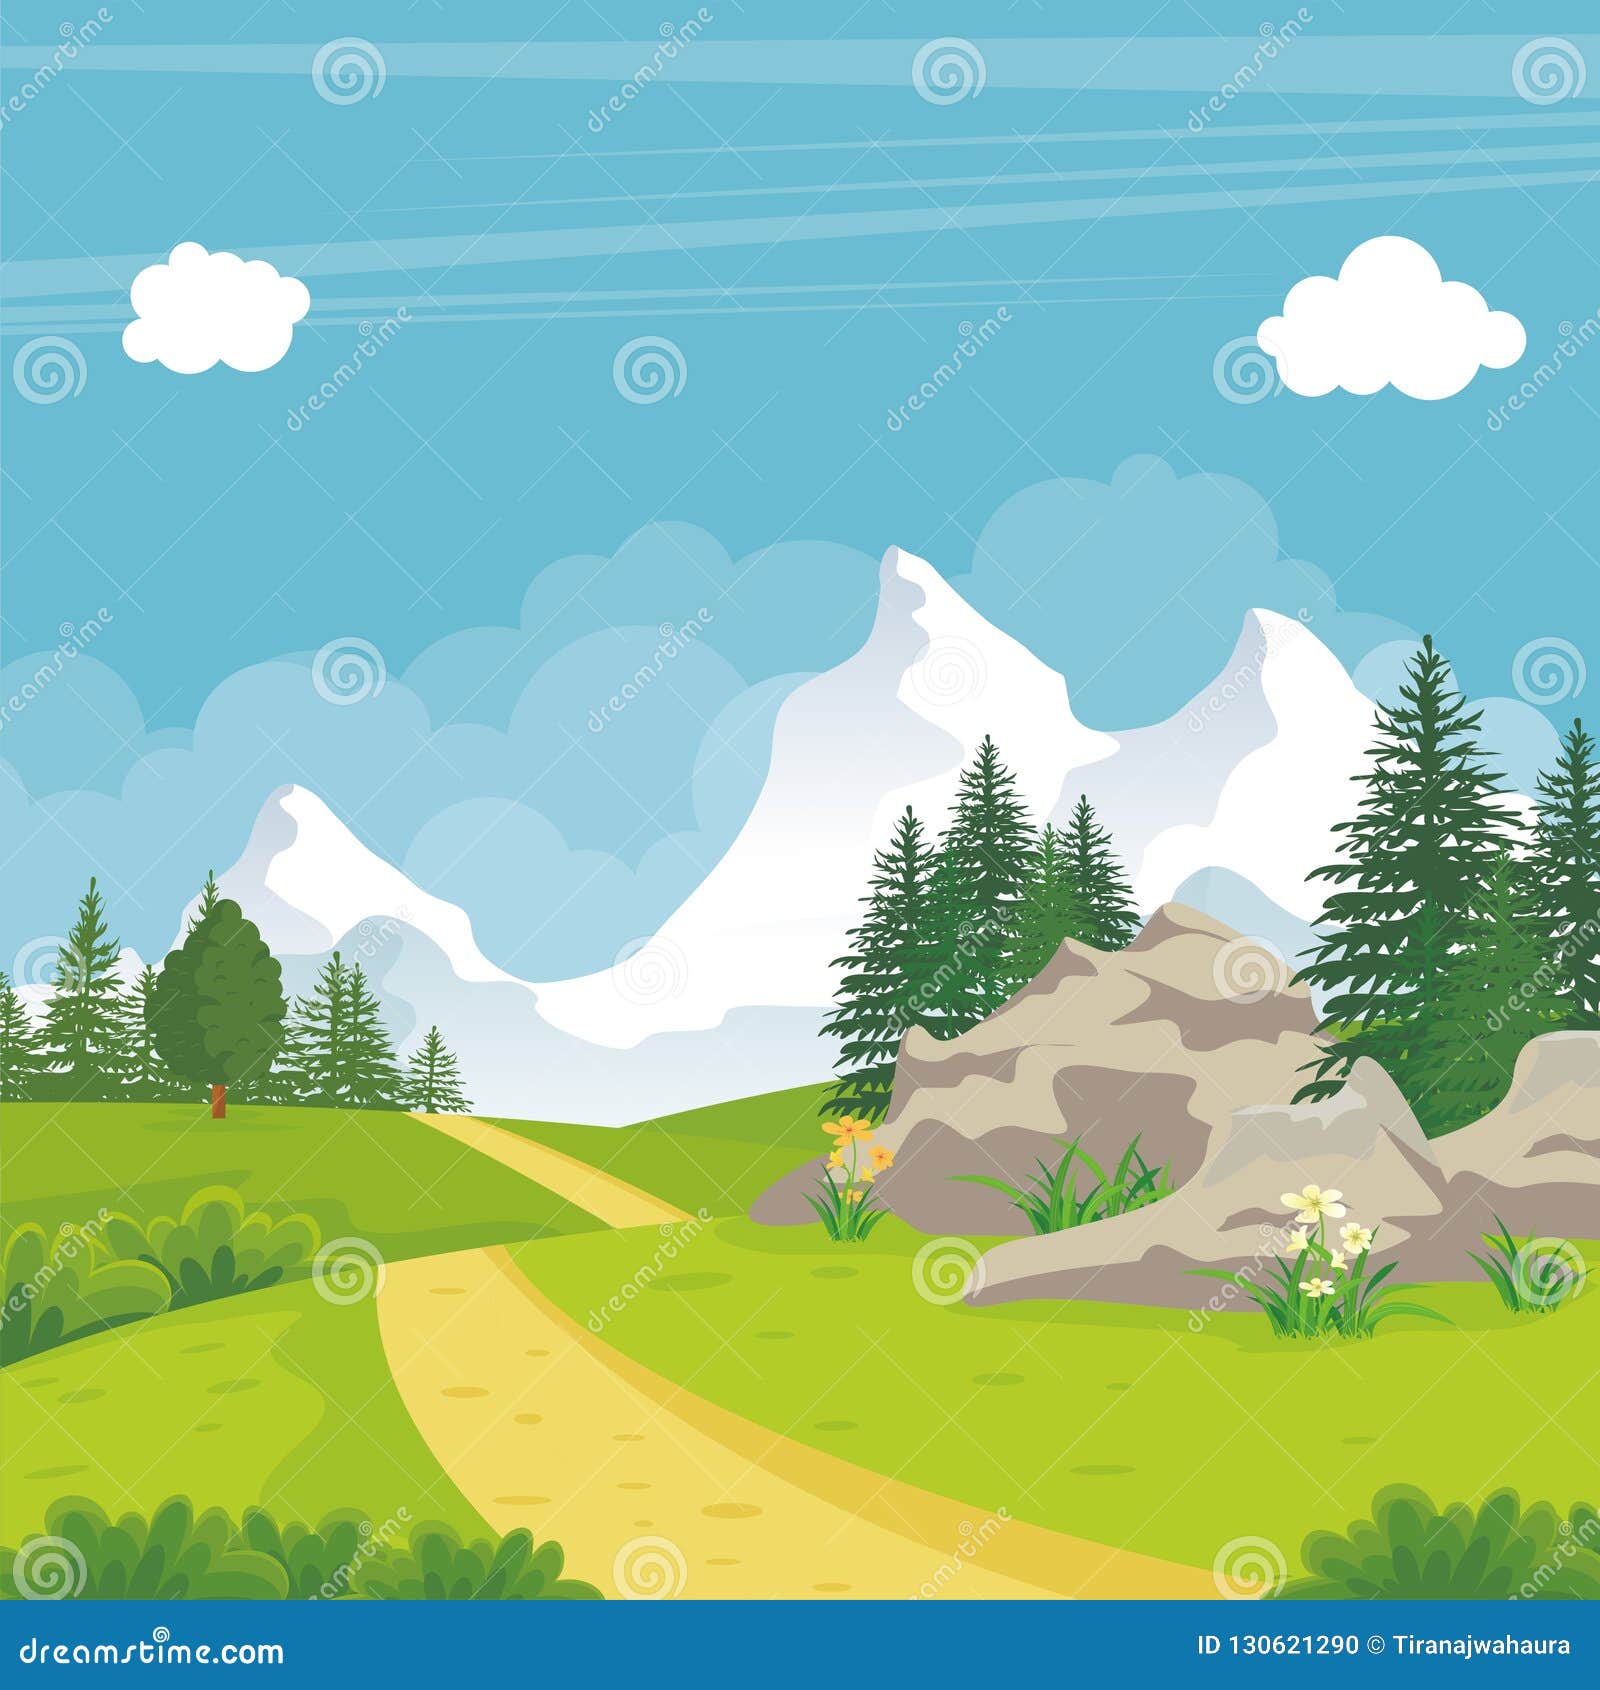 Beautiful Landscape with Rocky Hill, Lovely and Cute Scenery Cartoon  Design. Stock Vector - Illustration of blossom, flat: 130621290